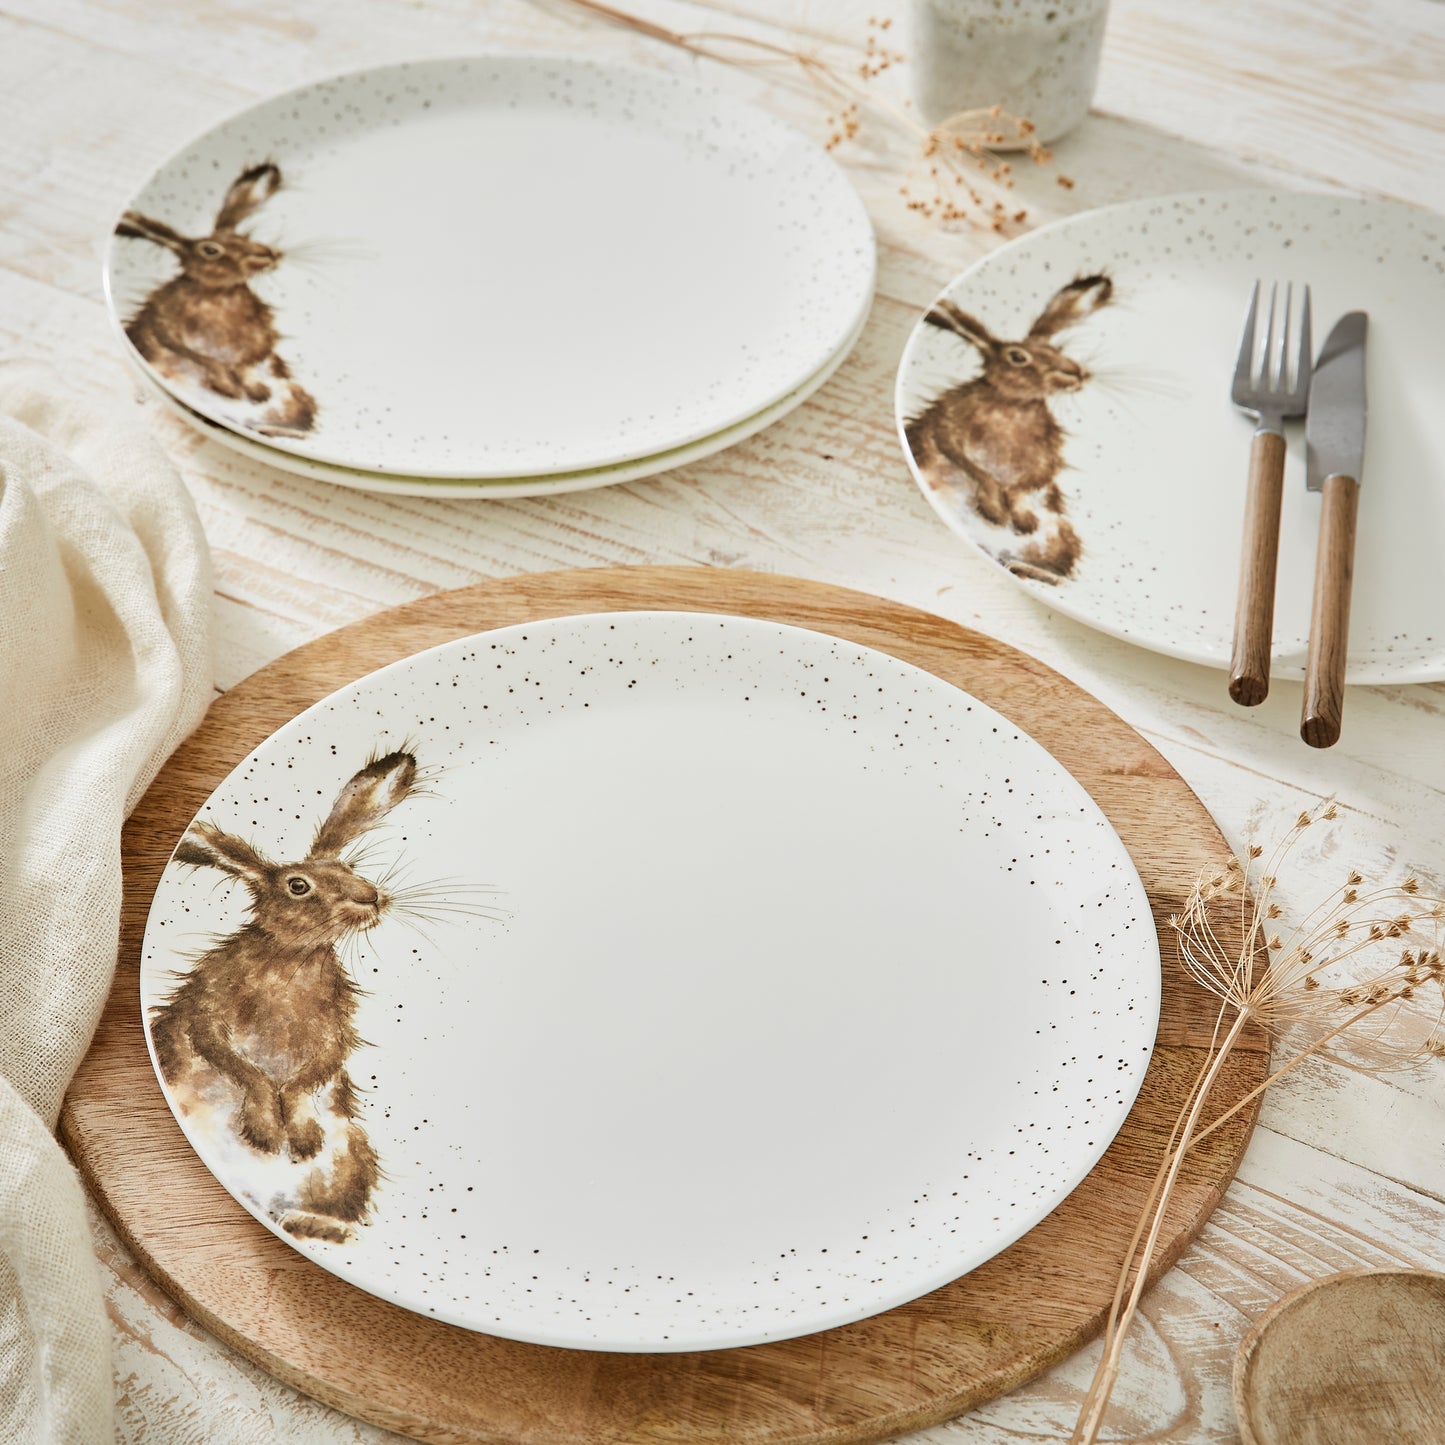 Royal Worcester Wrendale Designs 10.5 Inch Coupe Plates - Hare Set of 4